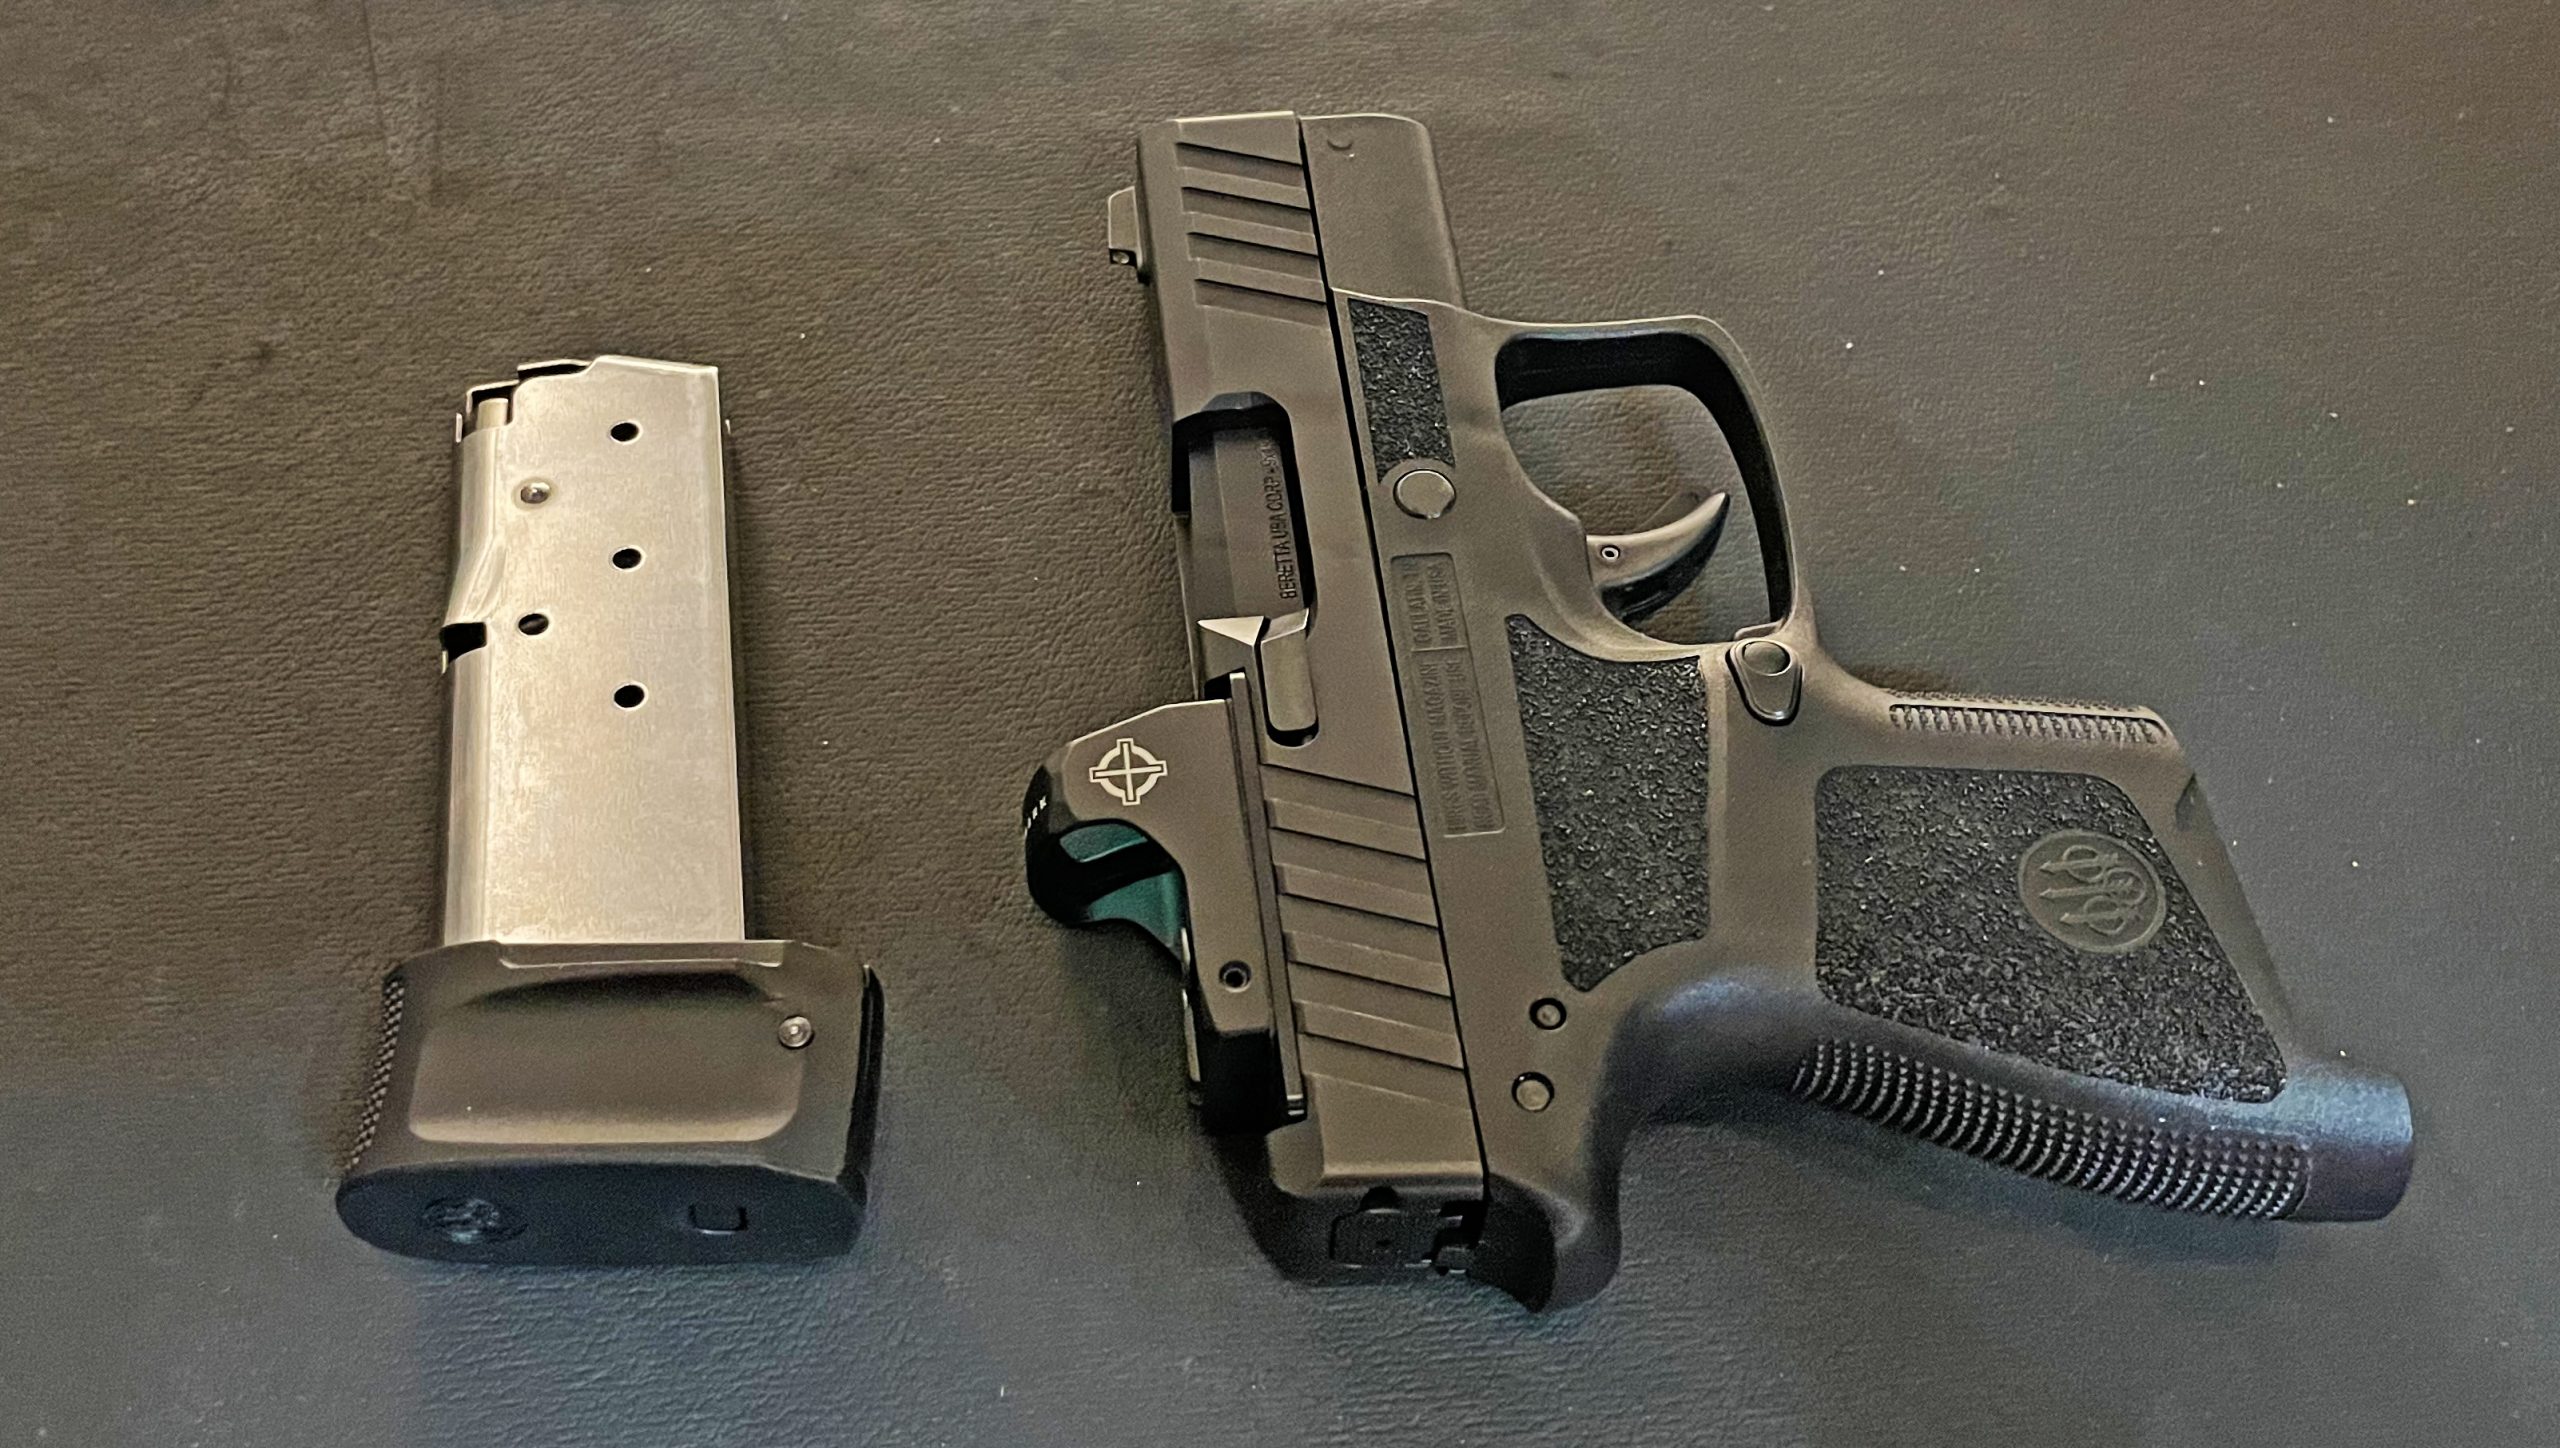 APX A1 Carry magazine and its intended CCW pistol.